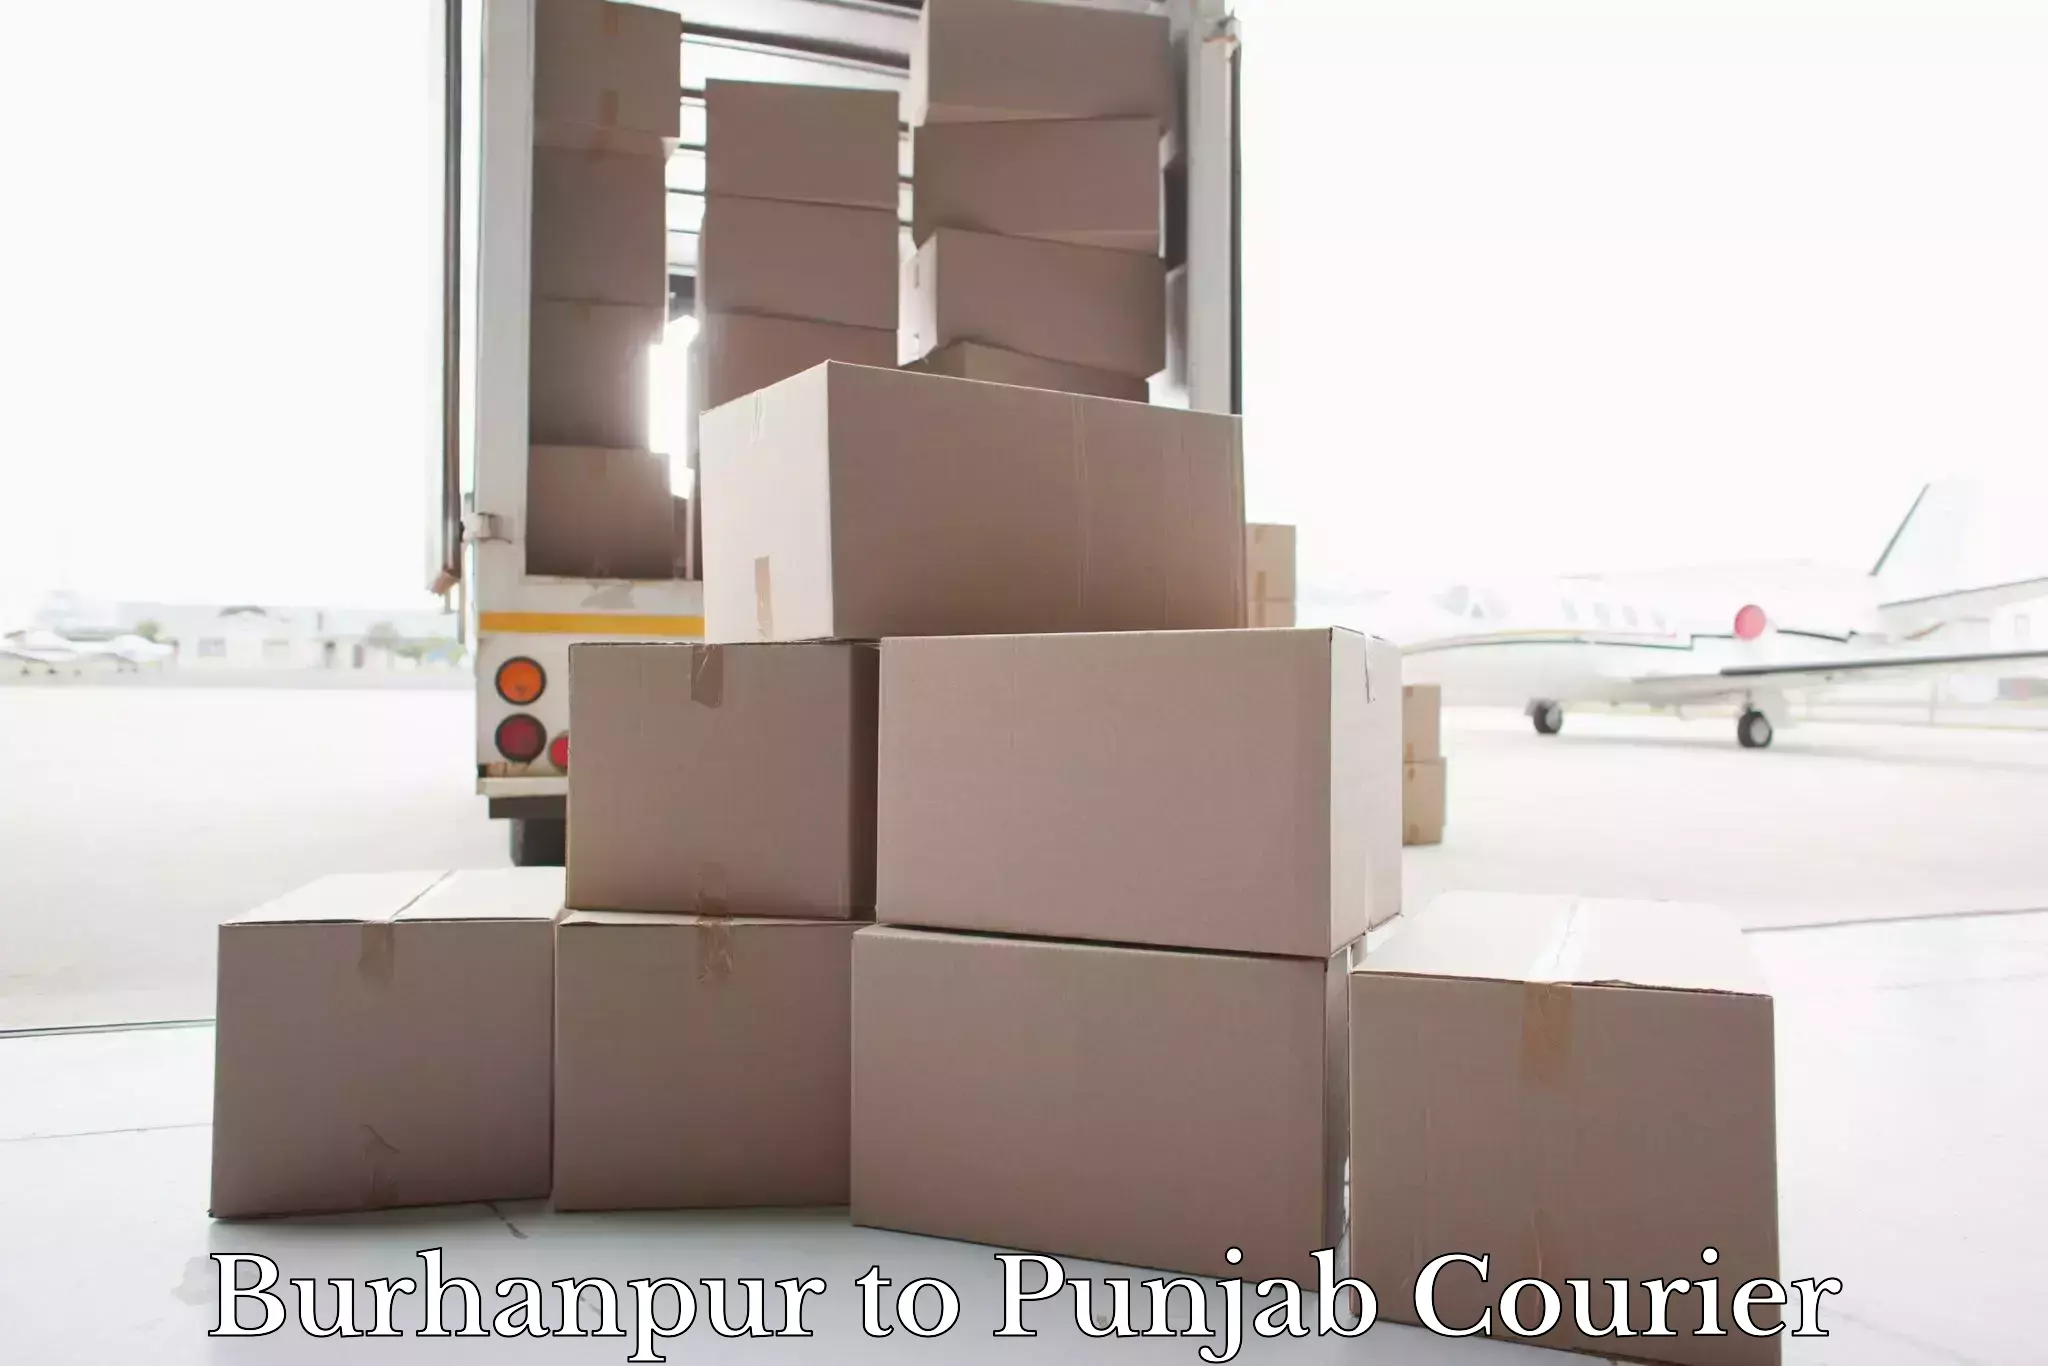 International baggage delivery in Burhanpur to Amritsar